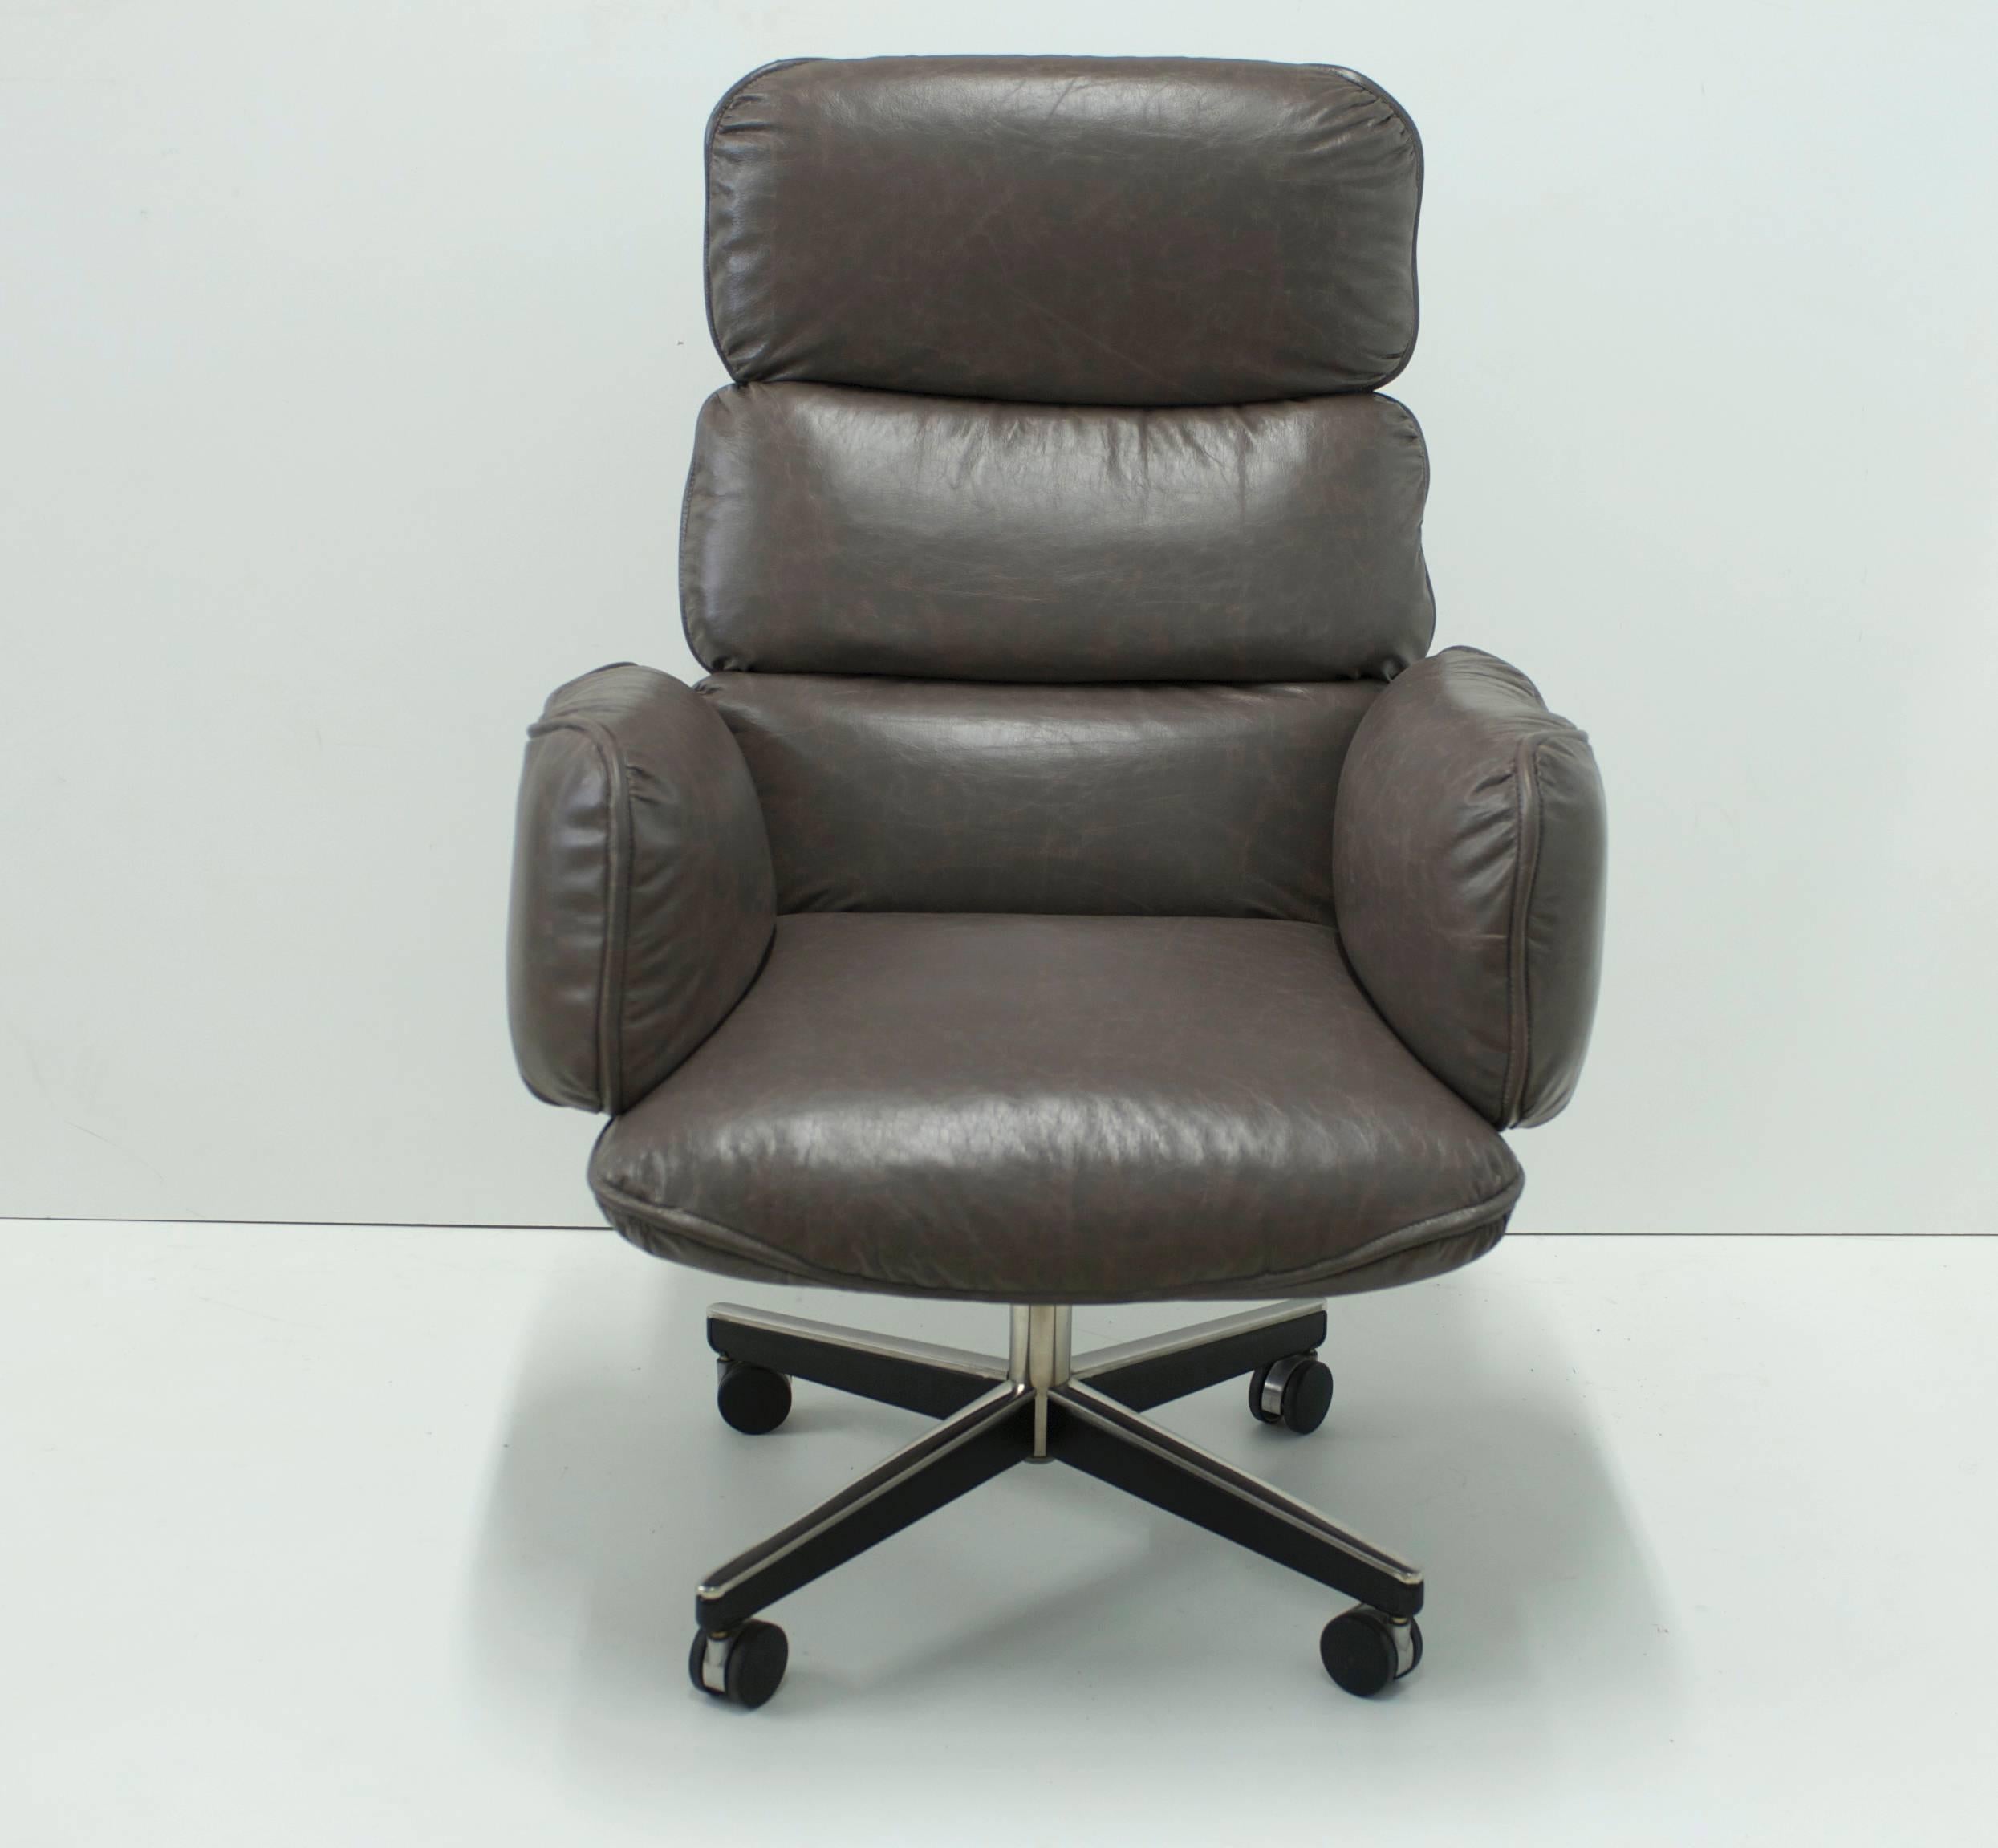 This very comfortable high back office or desk chair was designed by Otto Zapf and manufactured in West Germany for Knoll International. The chair tilts and swivels and retains its original tag. The chair sits on a polished steel swivel base with